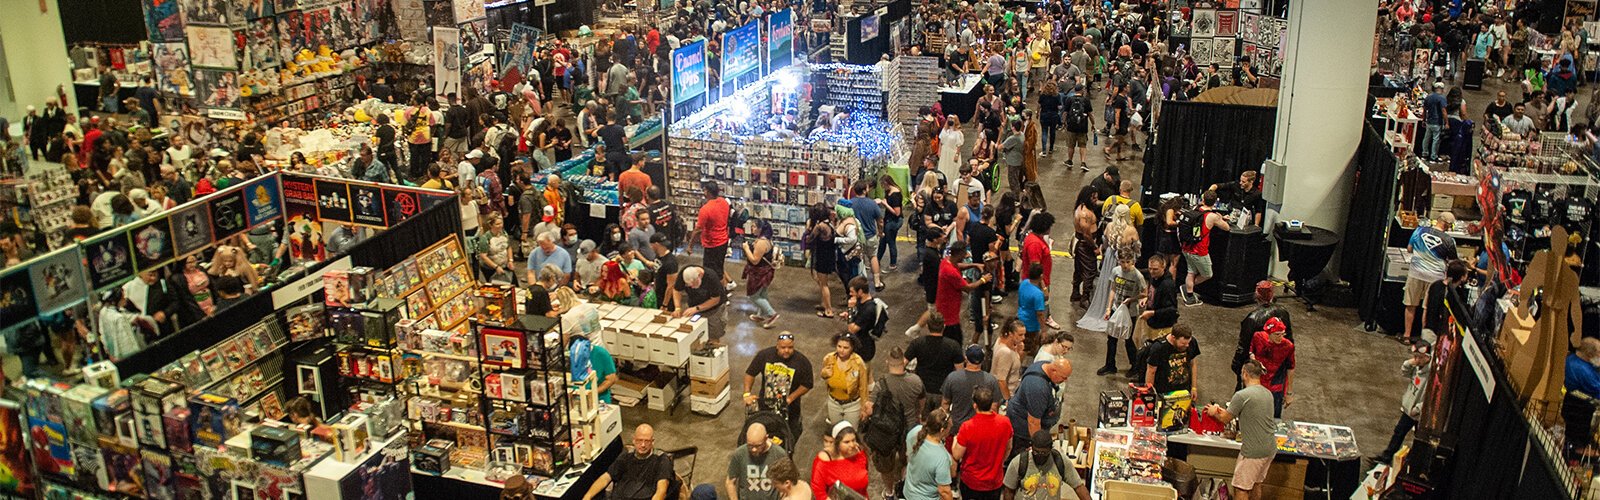 An overhead view of a small section of exhibitors at this year's Tampa Bay Comic Con at the Tampa Convention Center